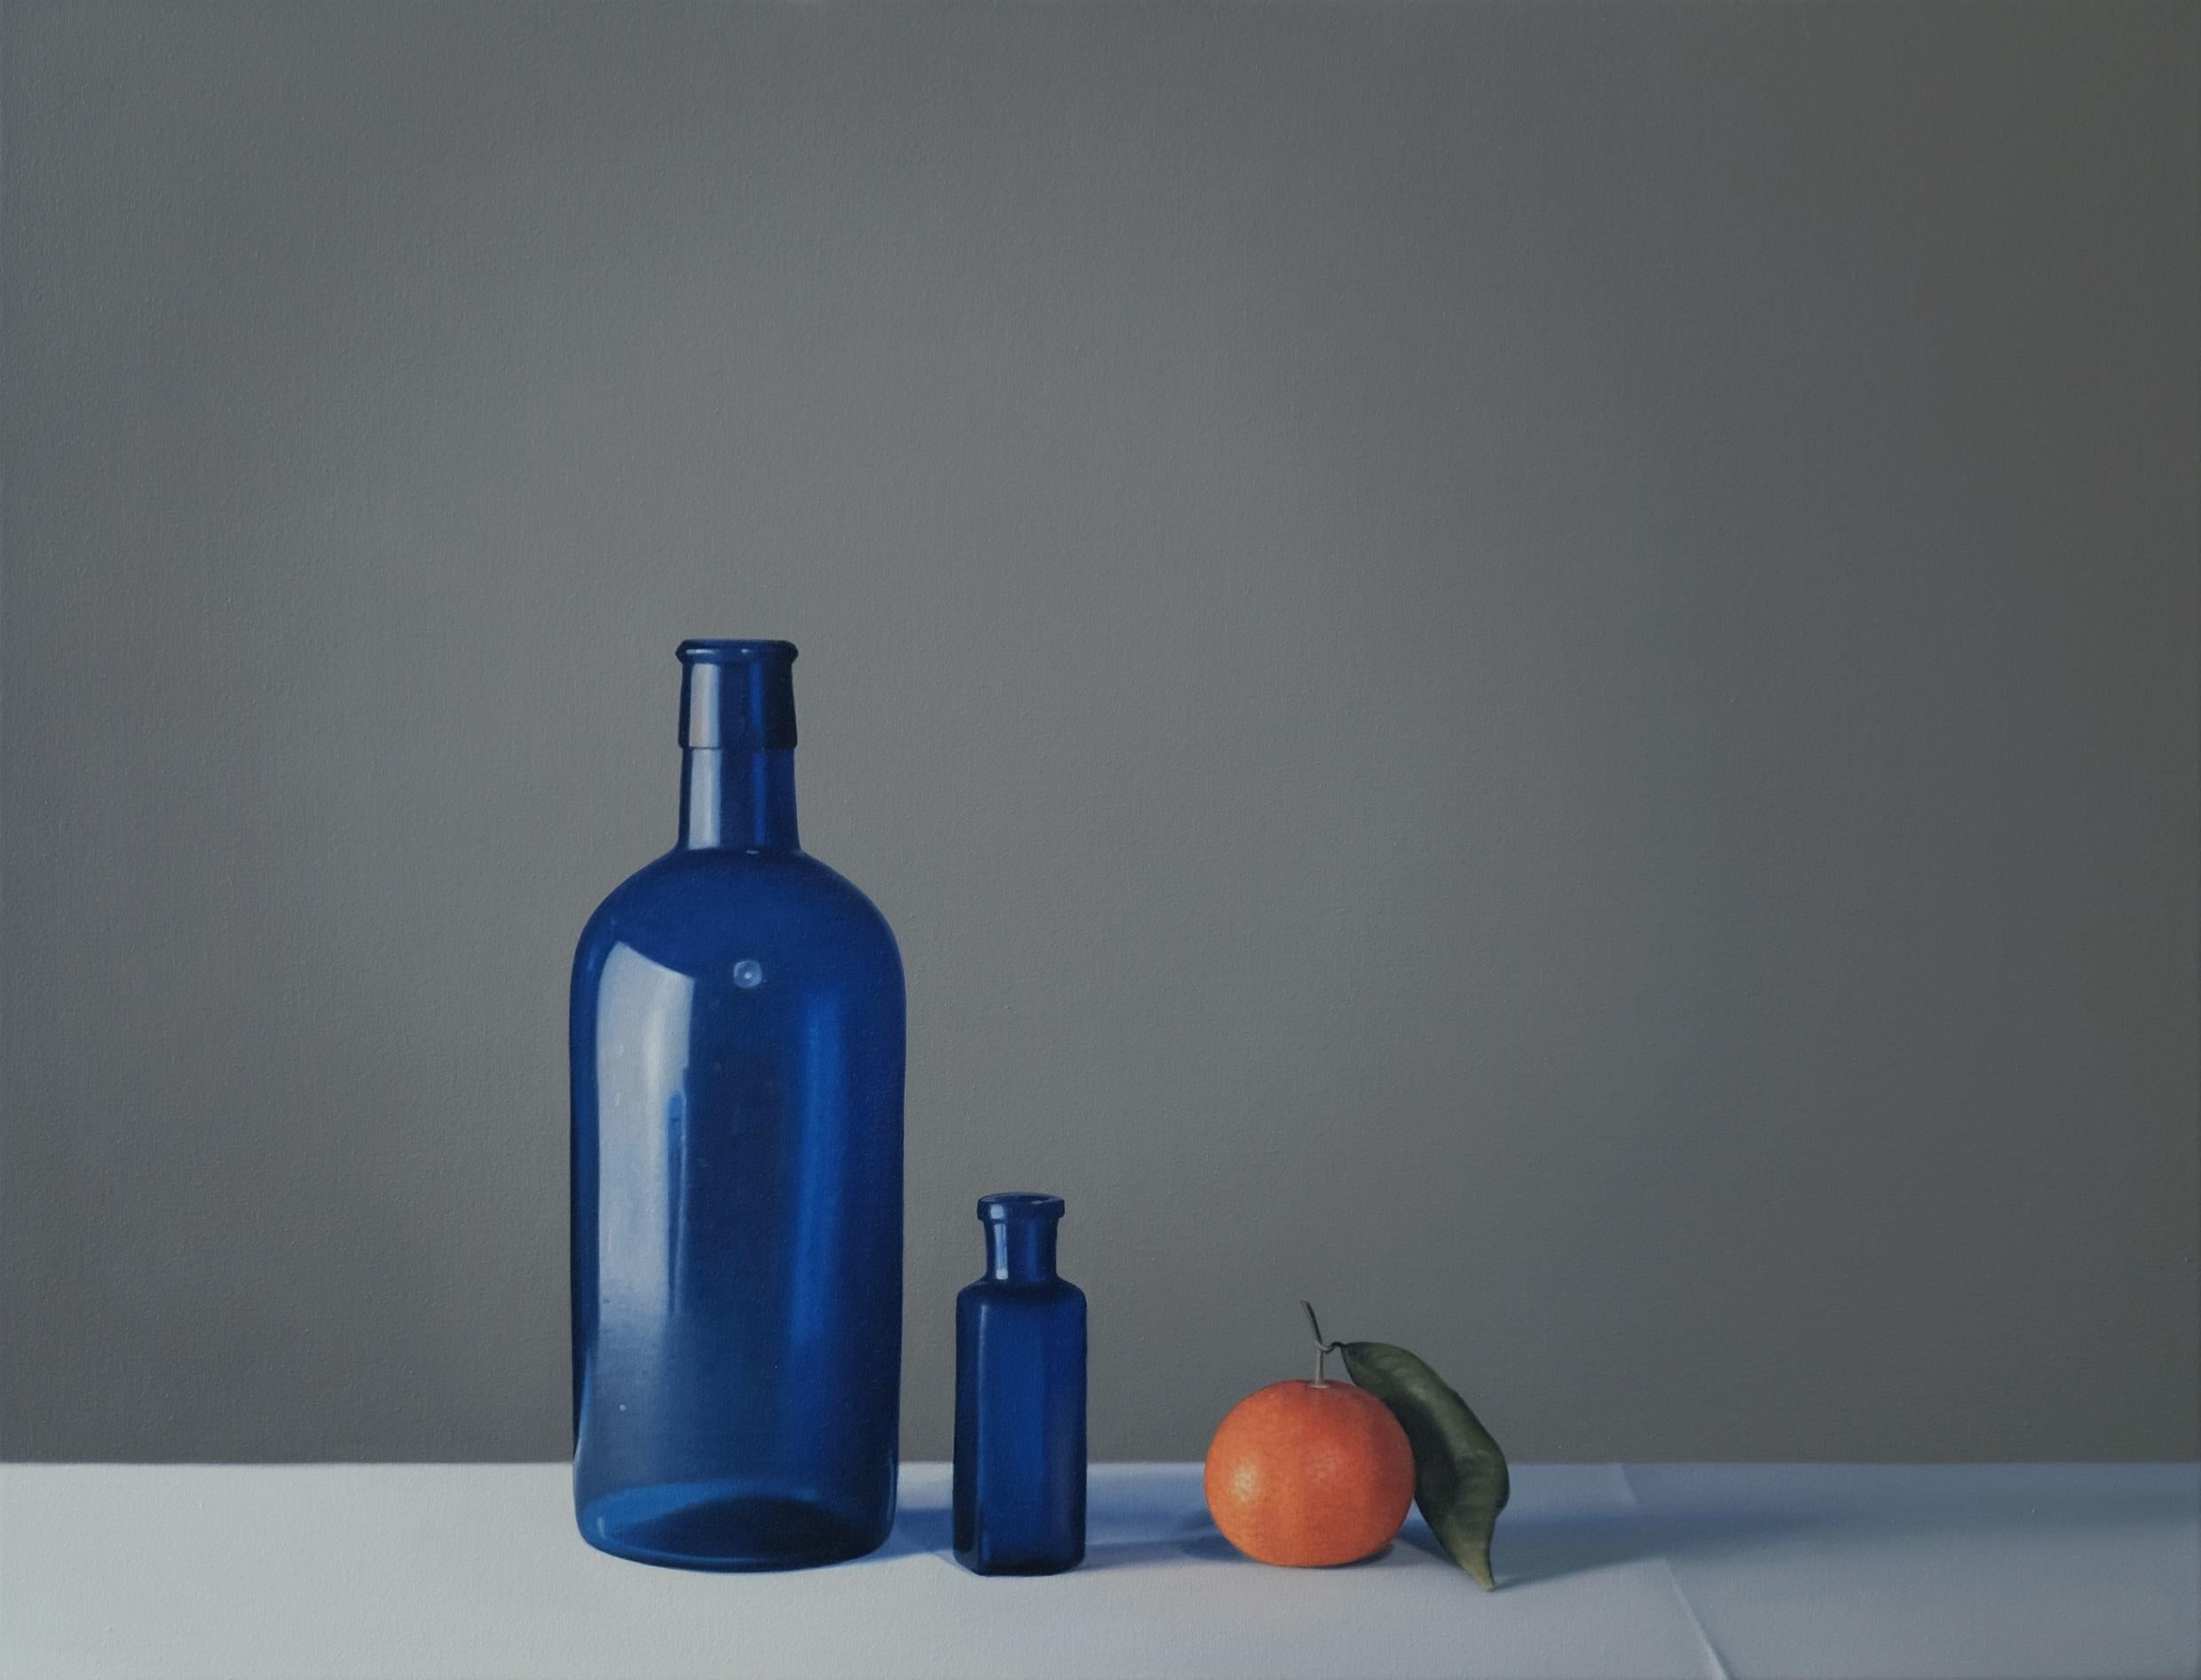 Still Life with Two Blue Glass Bottles and Clementine